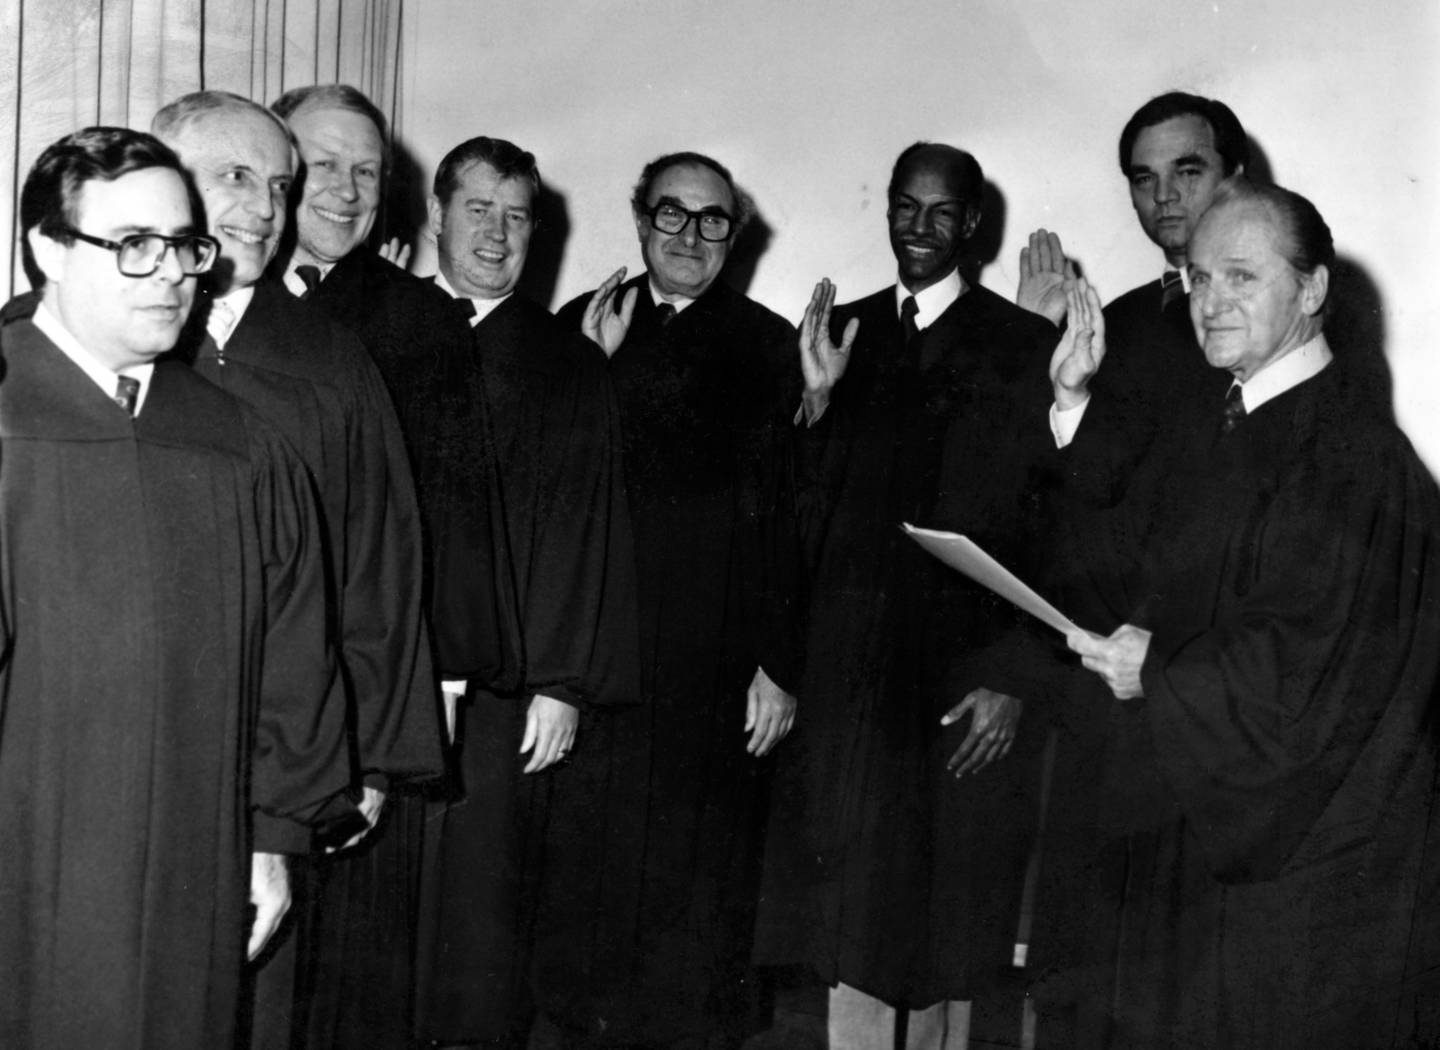 Chief Judge Harry G. Comerford, right, administers the oath of office to seven new associate judges in 1980, including Michael Toomin at far left. 